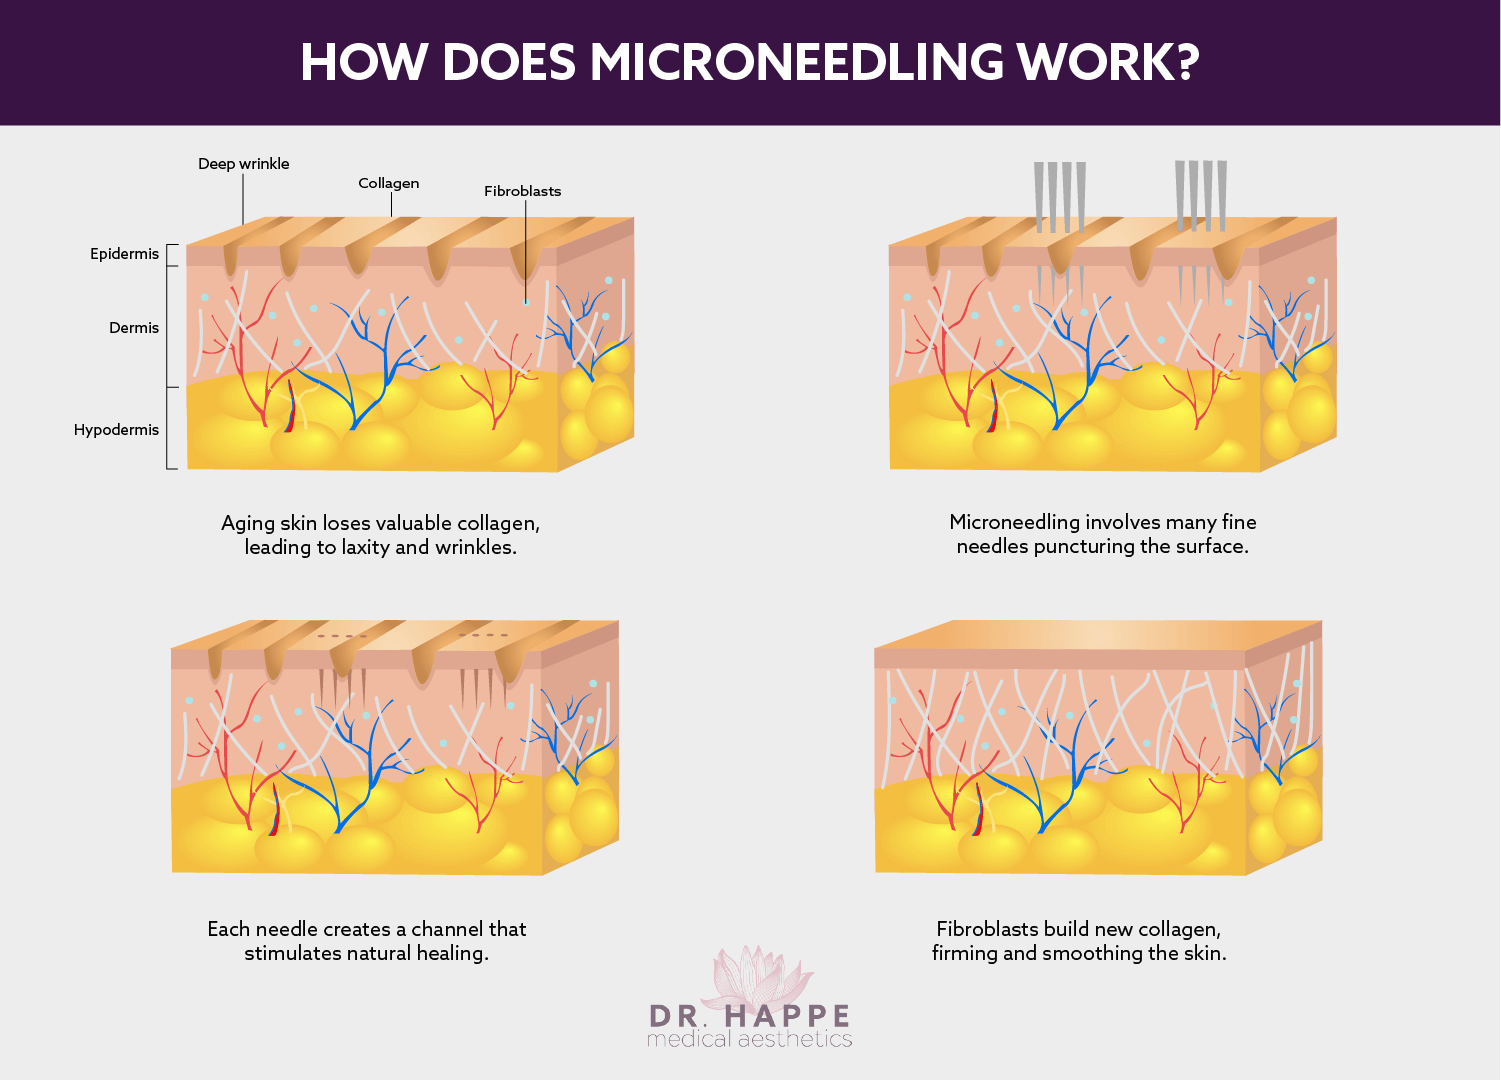 Learn about microneedling at the Boston area’s Dr. Happe Medical Aesthetics.